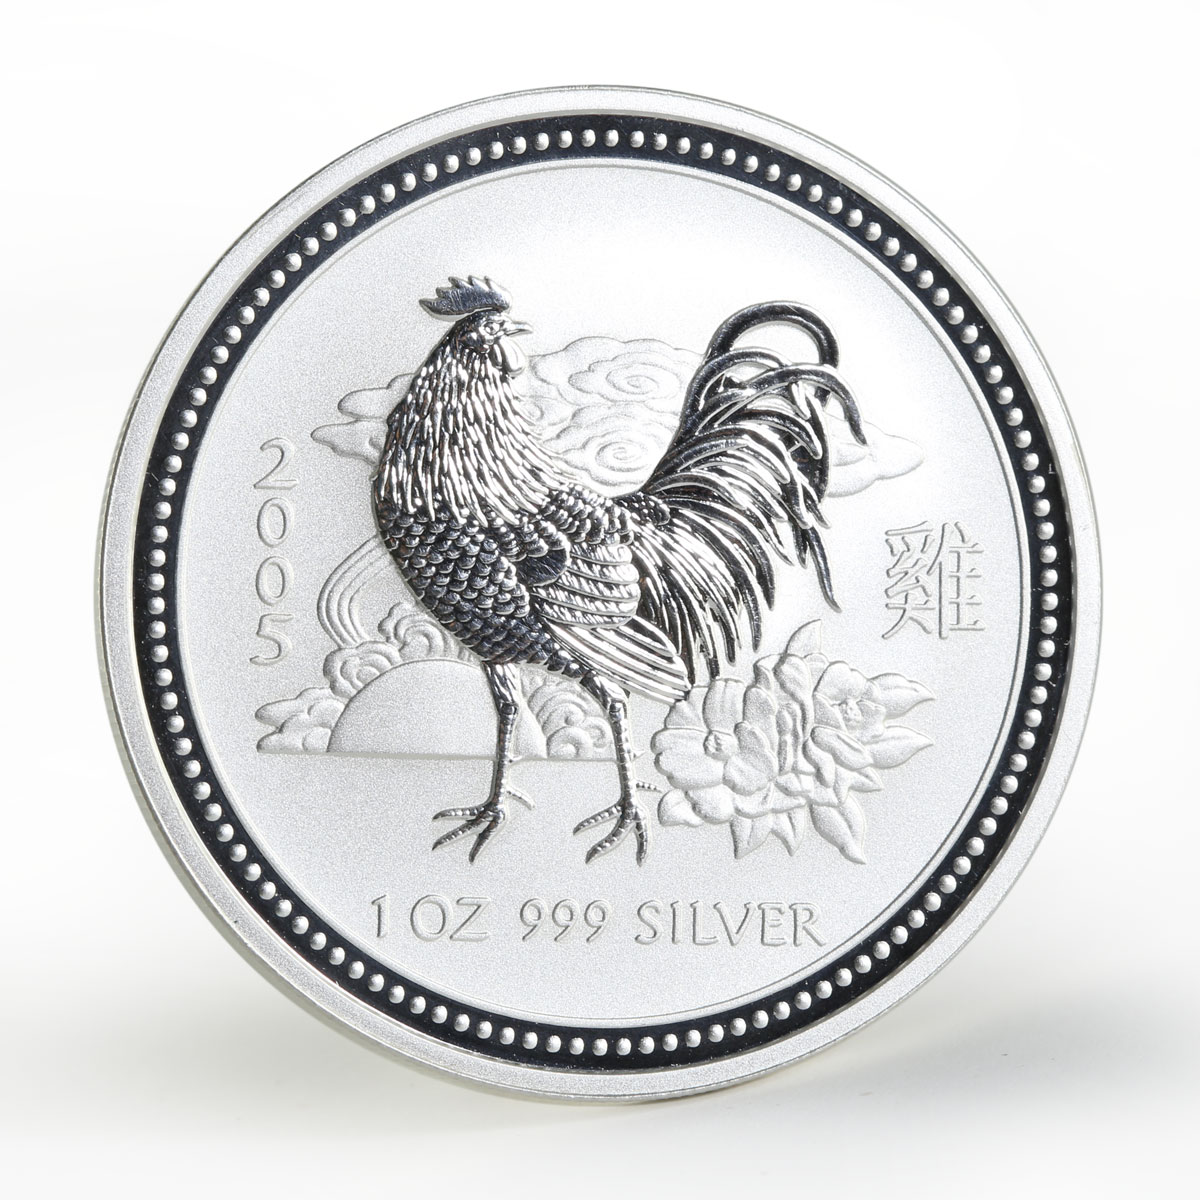 Australia 1 dollar Year of the Rooster Lunar Series I silver coin 1oz 2005